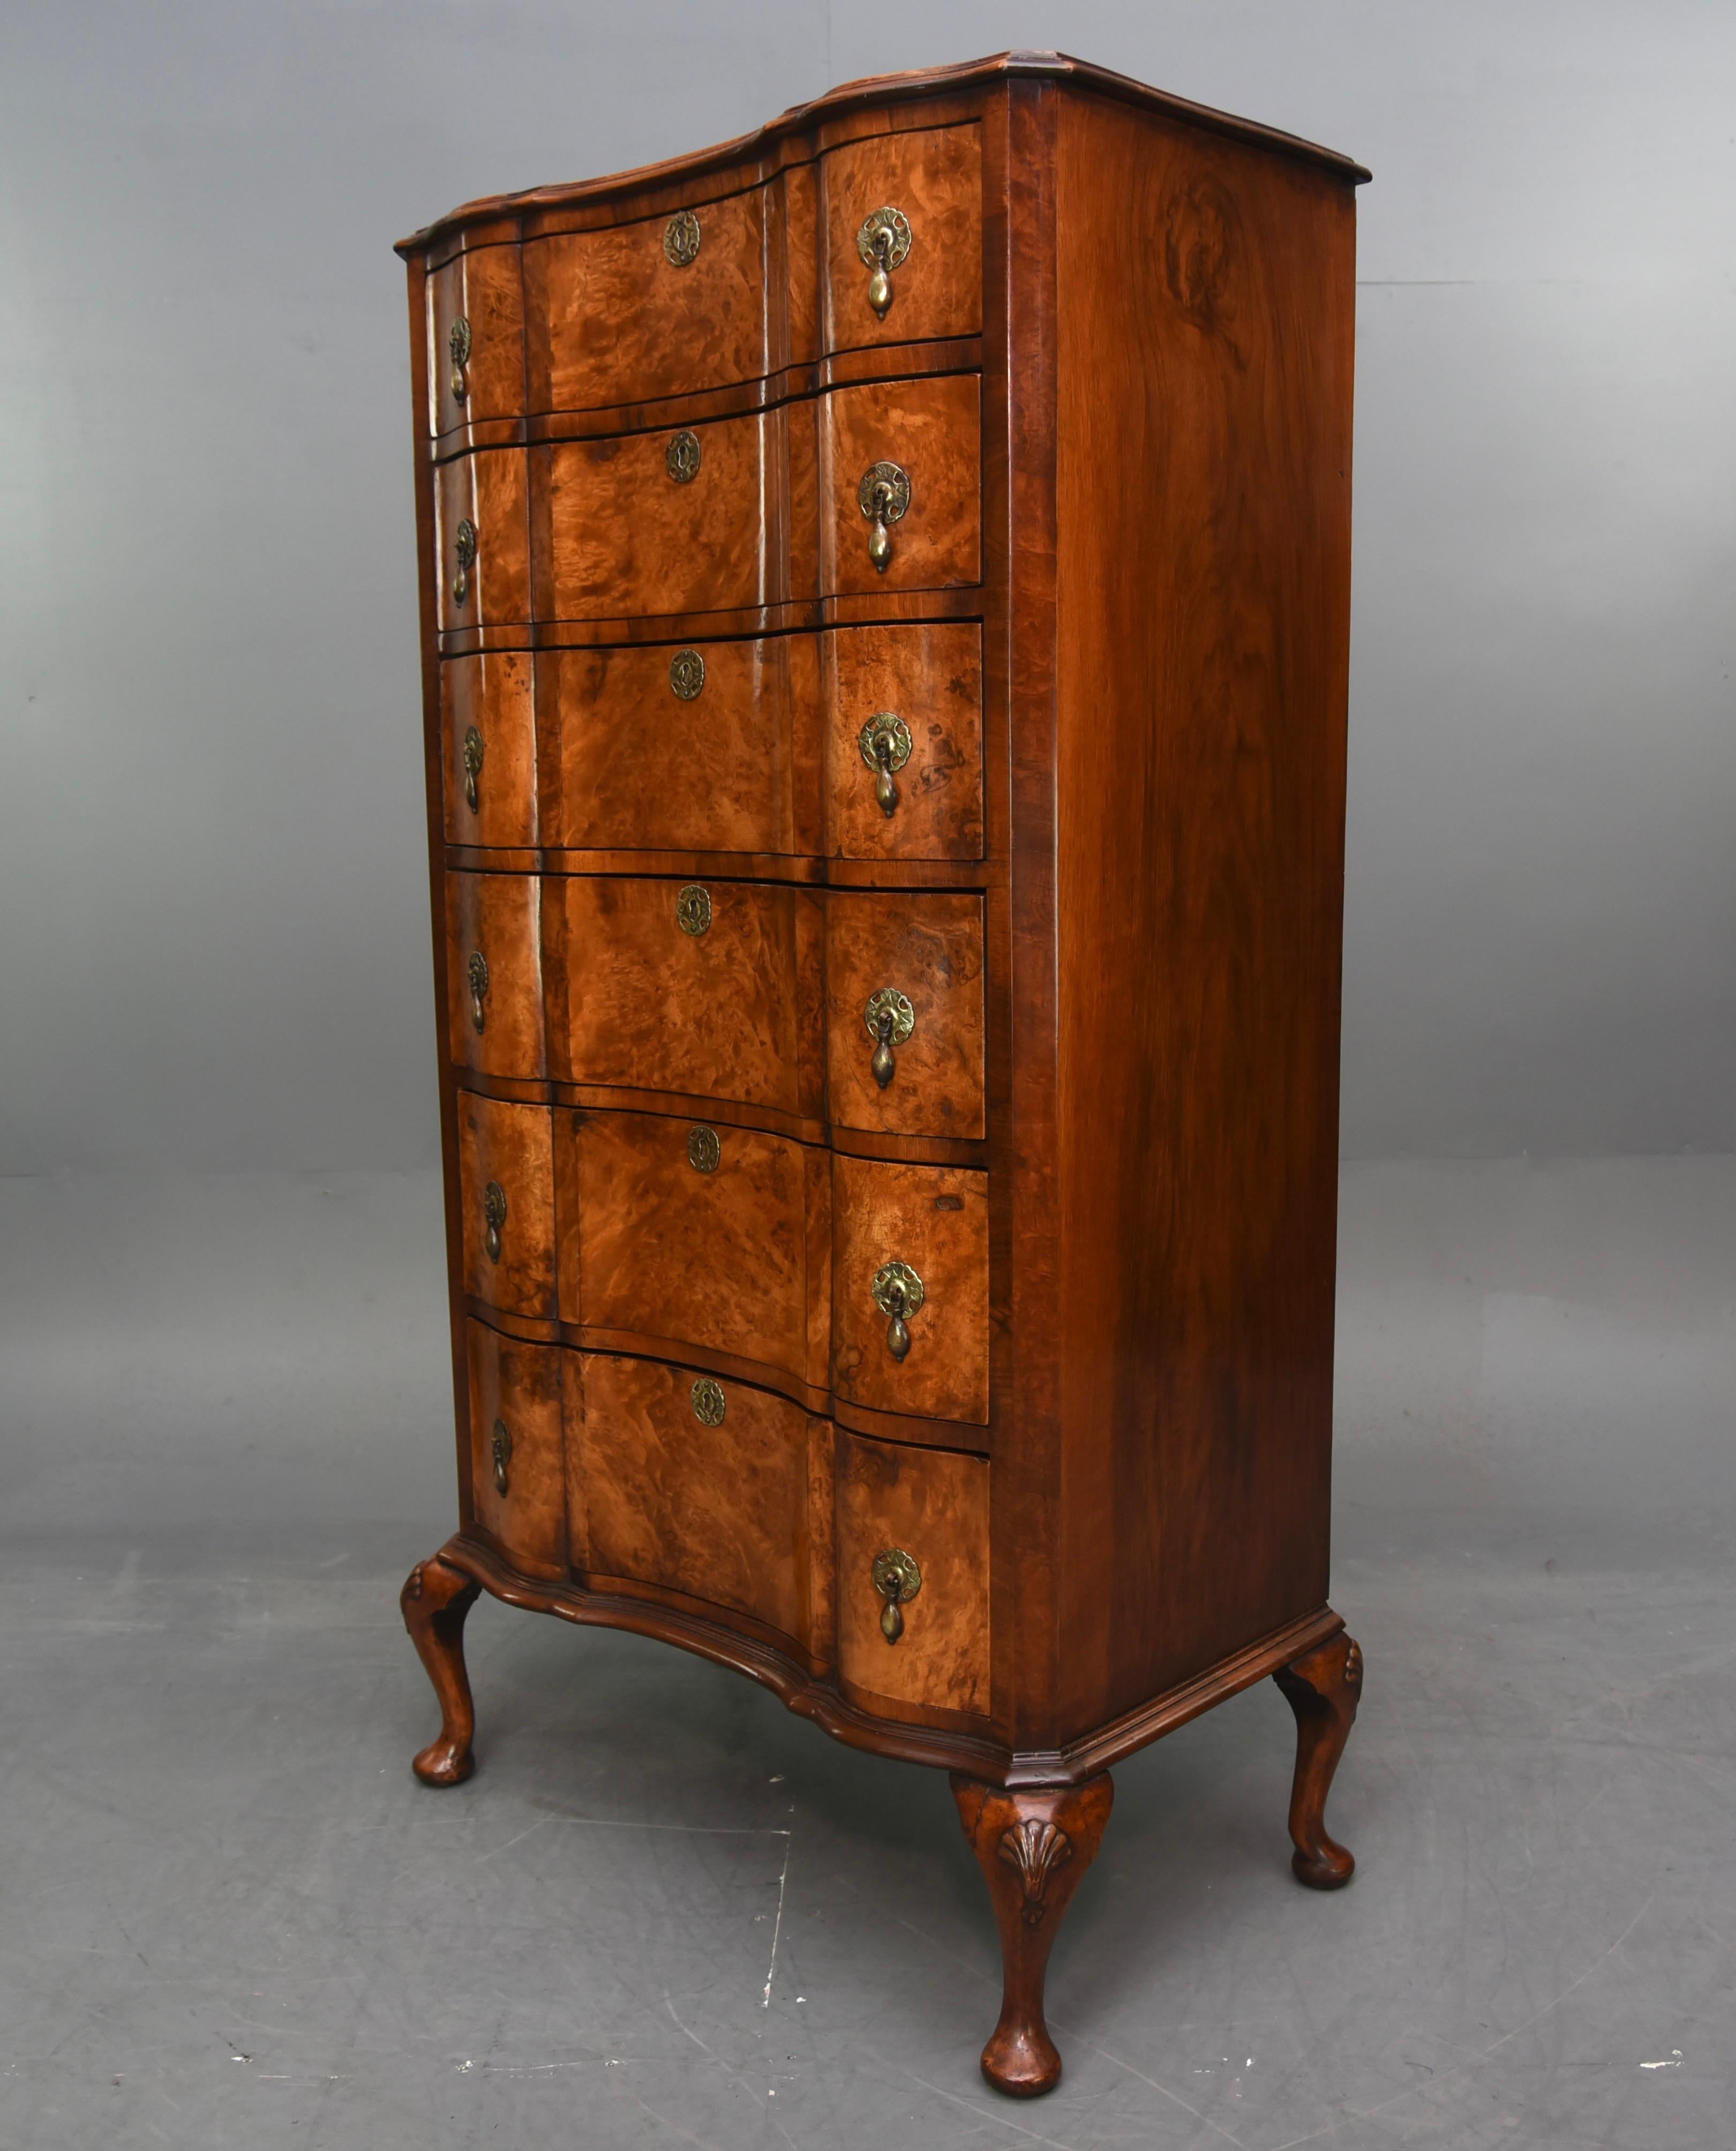 fine quality Edwardian burr walnut Queen Anne style six drawer tall boy.
The chest has six oak lined hand dovetailed drawers with a wonderful shape front and original brass drop handles.
The chest is a fabulous colour and has a very good